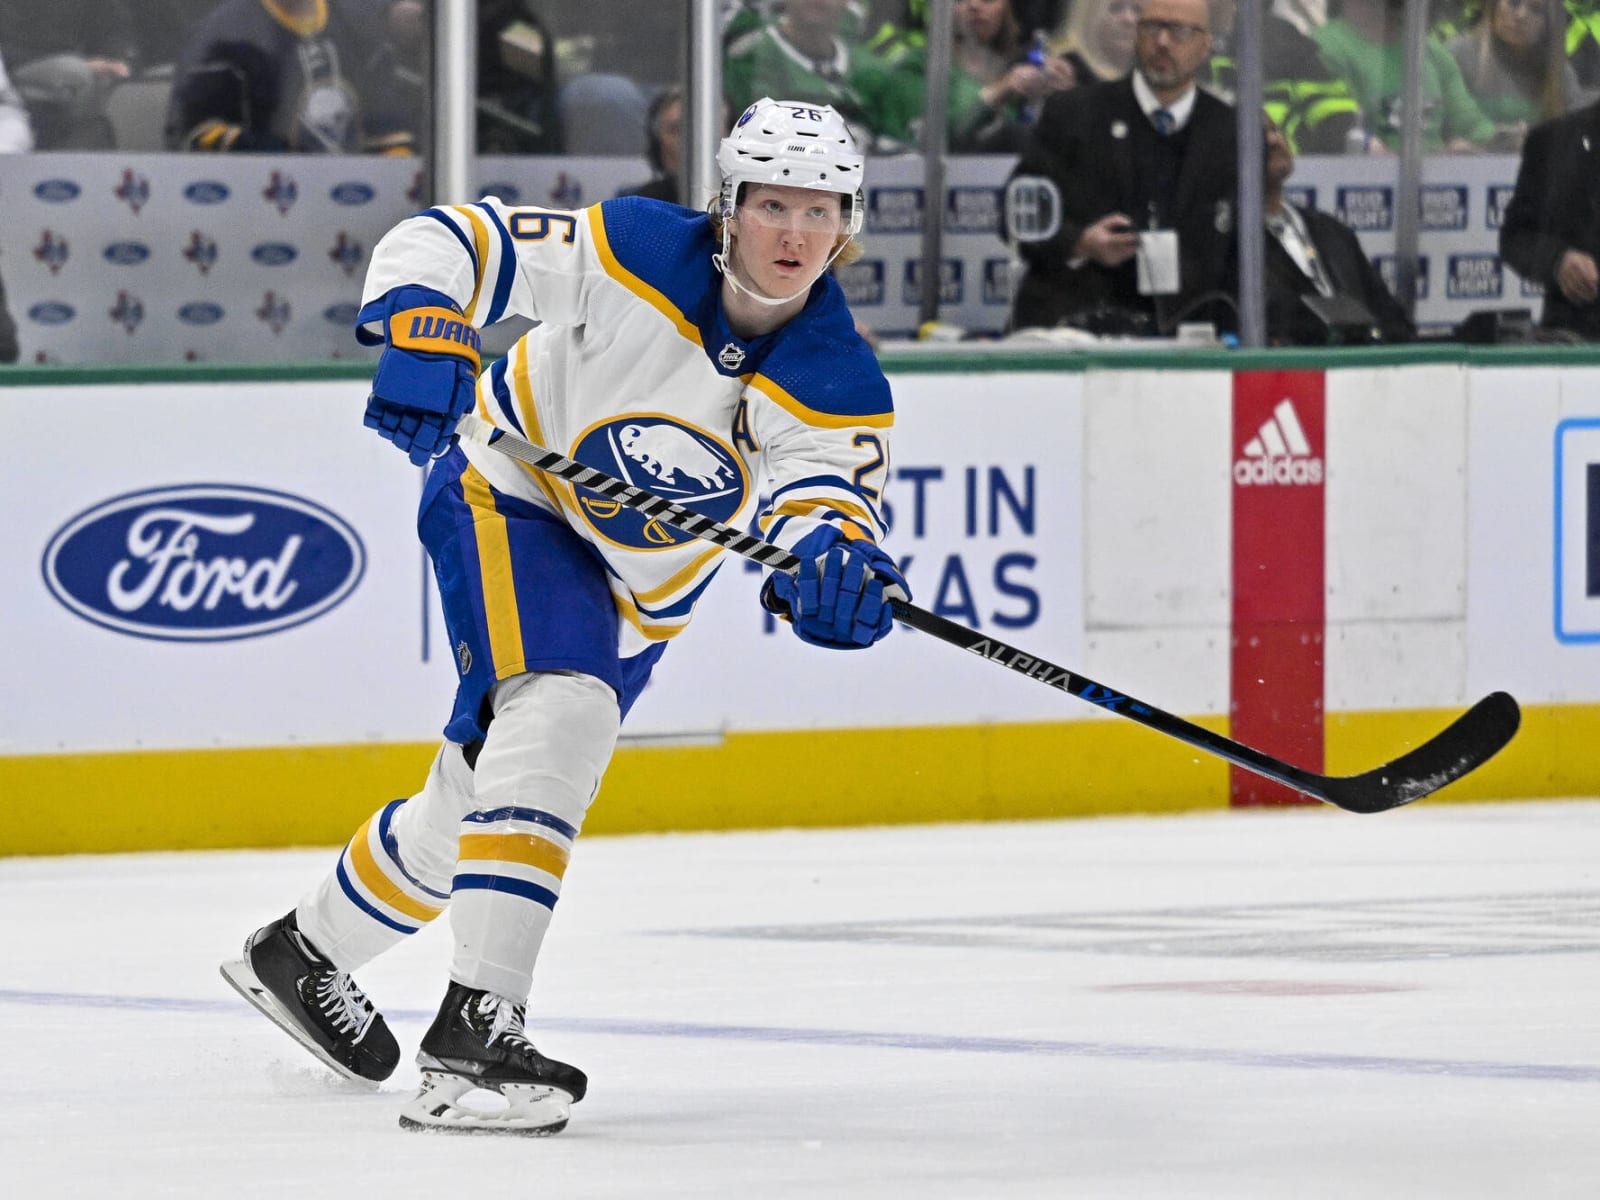 NHL All-Star Game 2023 complete rosters: Rasmus Dahlin named